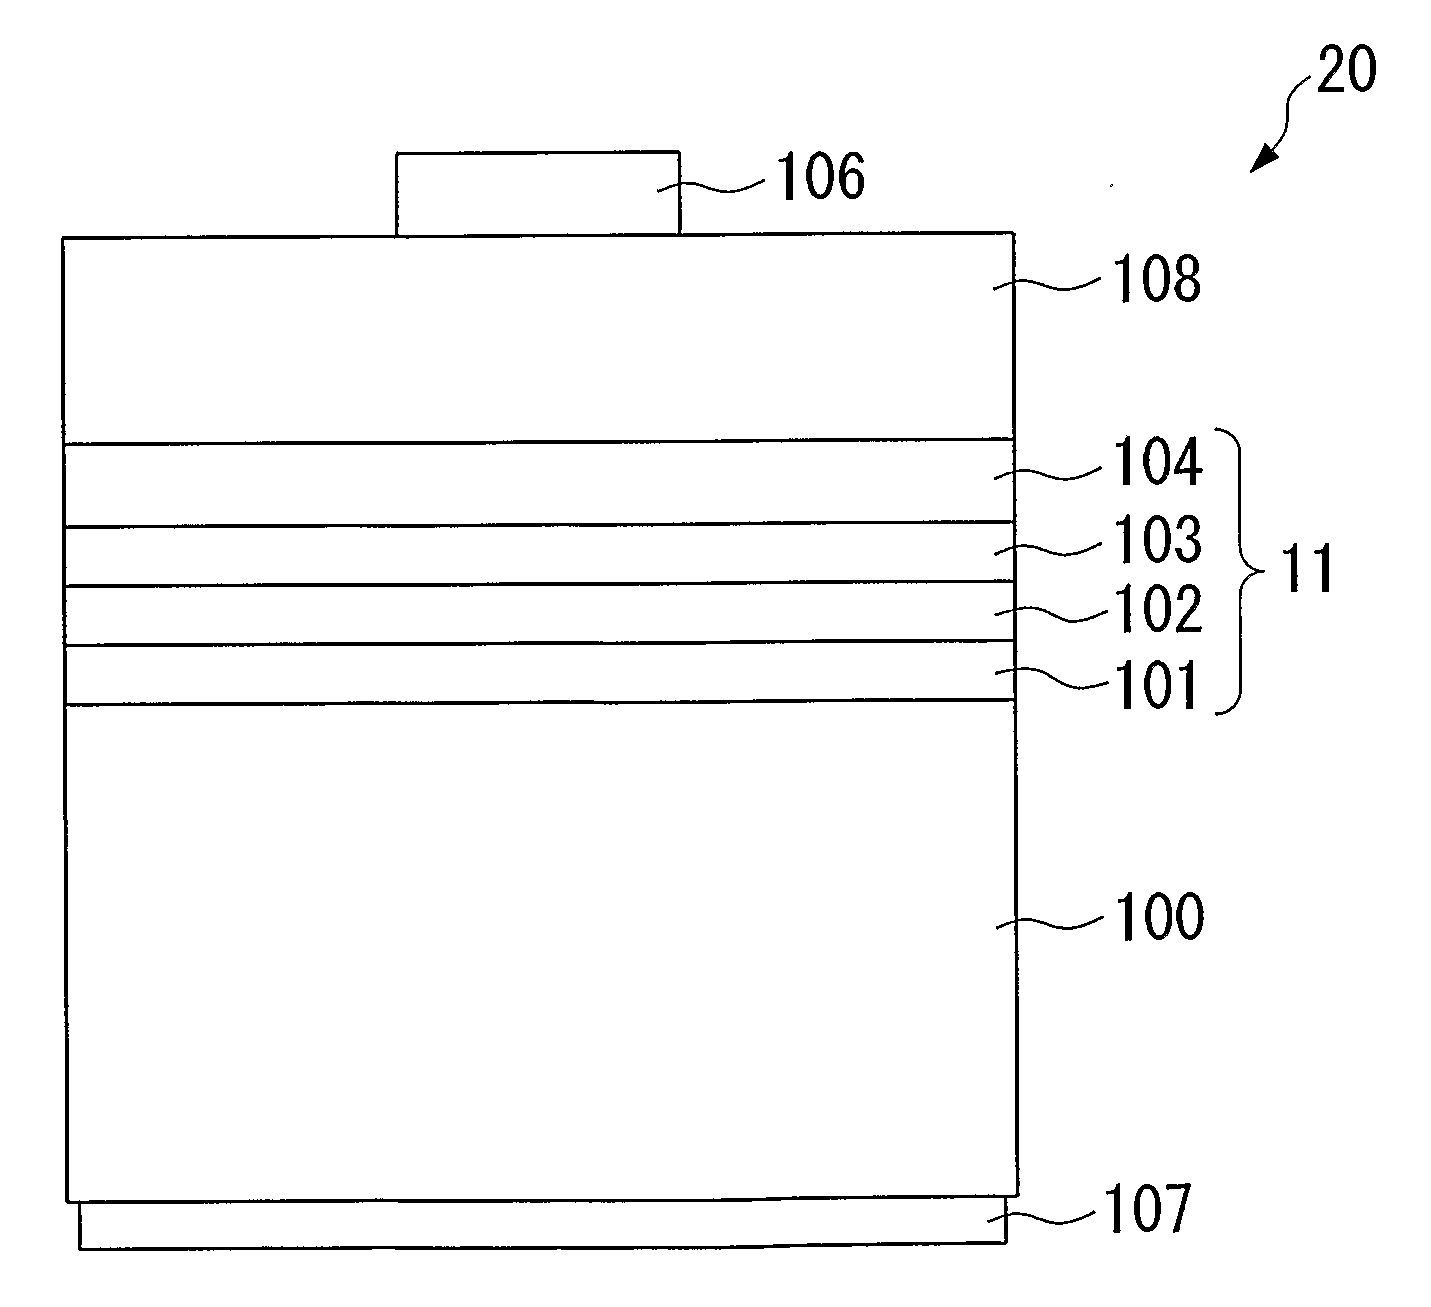 Compound semiconductor light-emitting diode